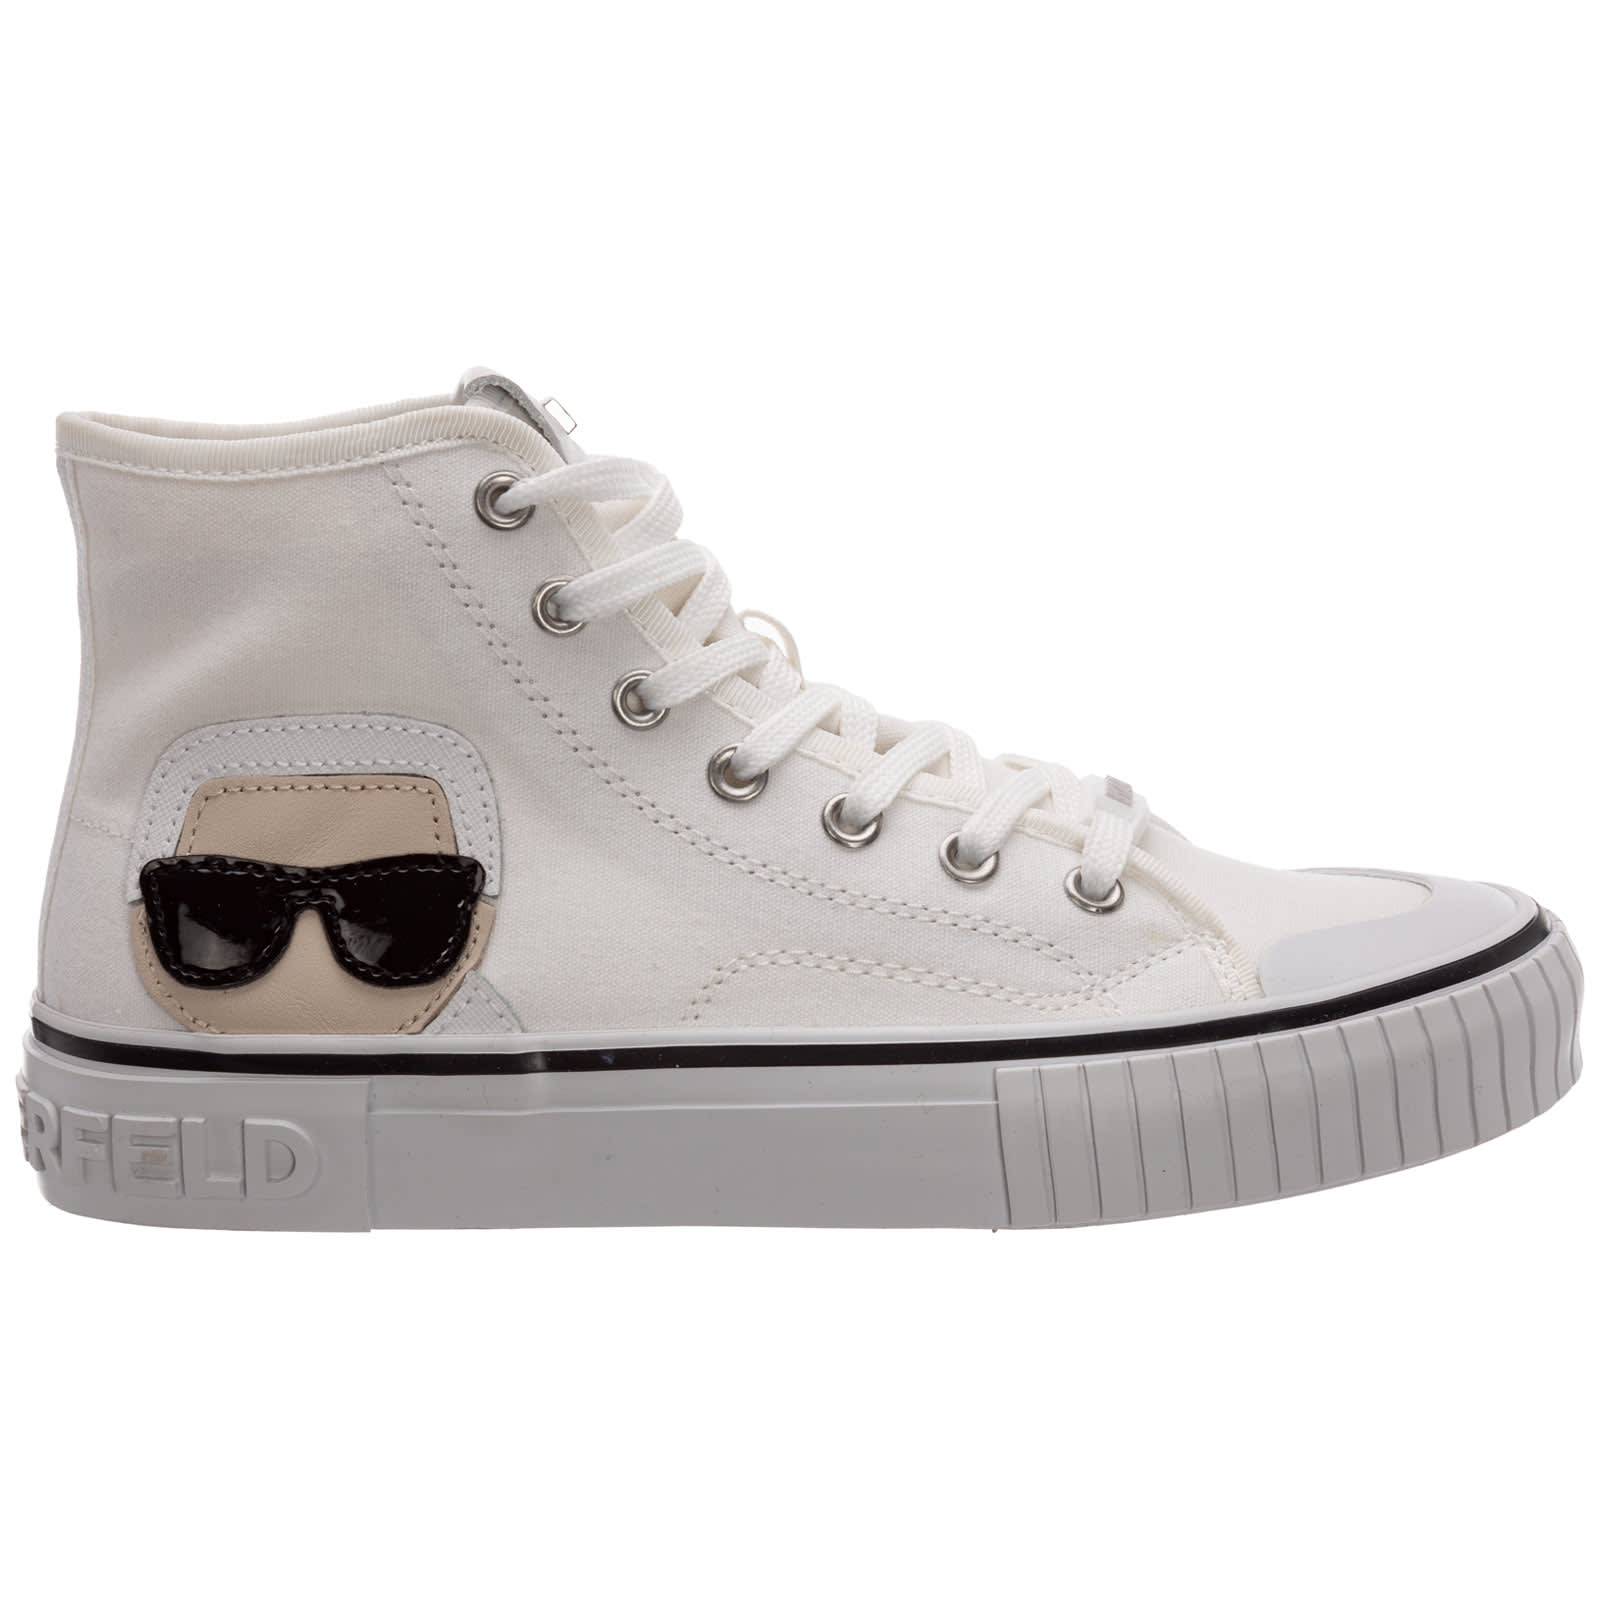 Buy Karl Lagerfeld Kampus High-top Sneakers online, shop Karl Lagerfeld shoes with free shipping